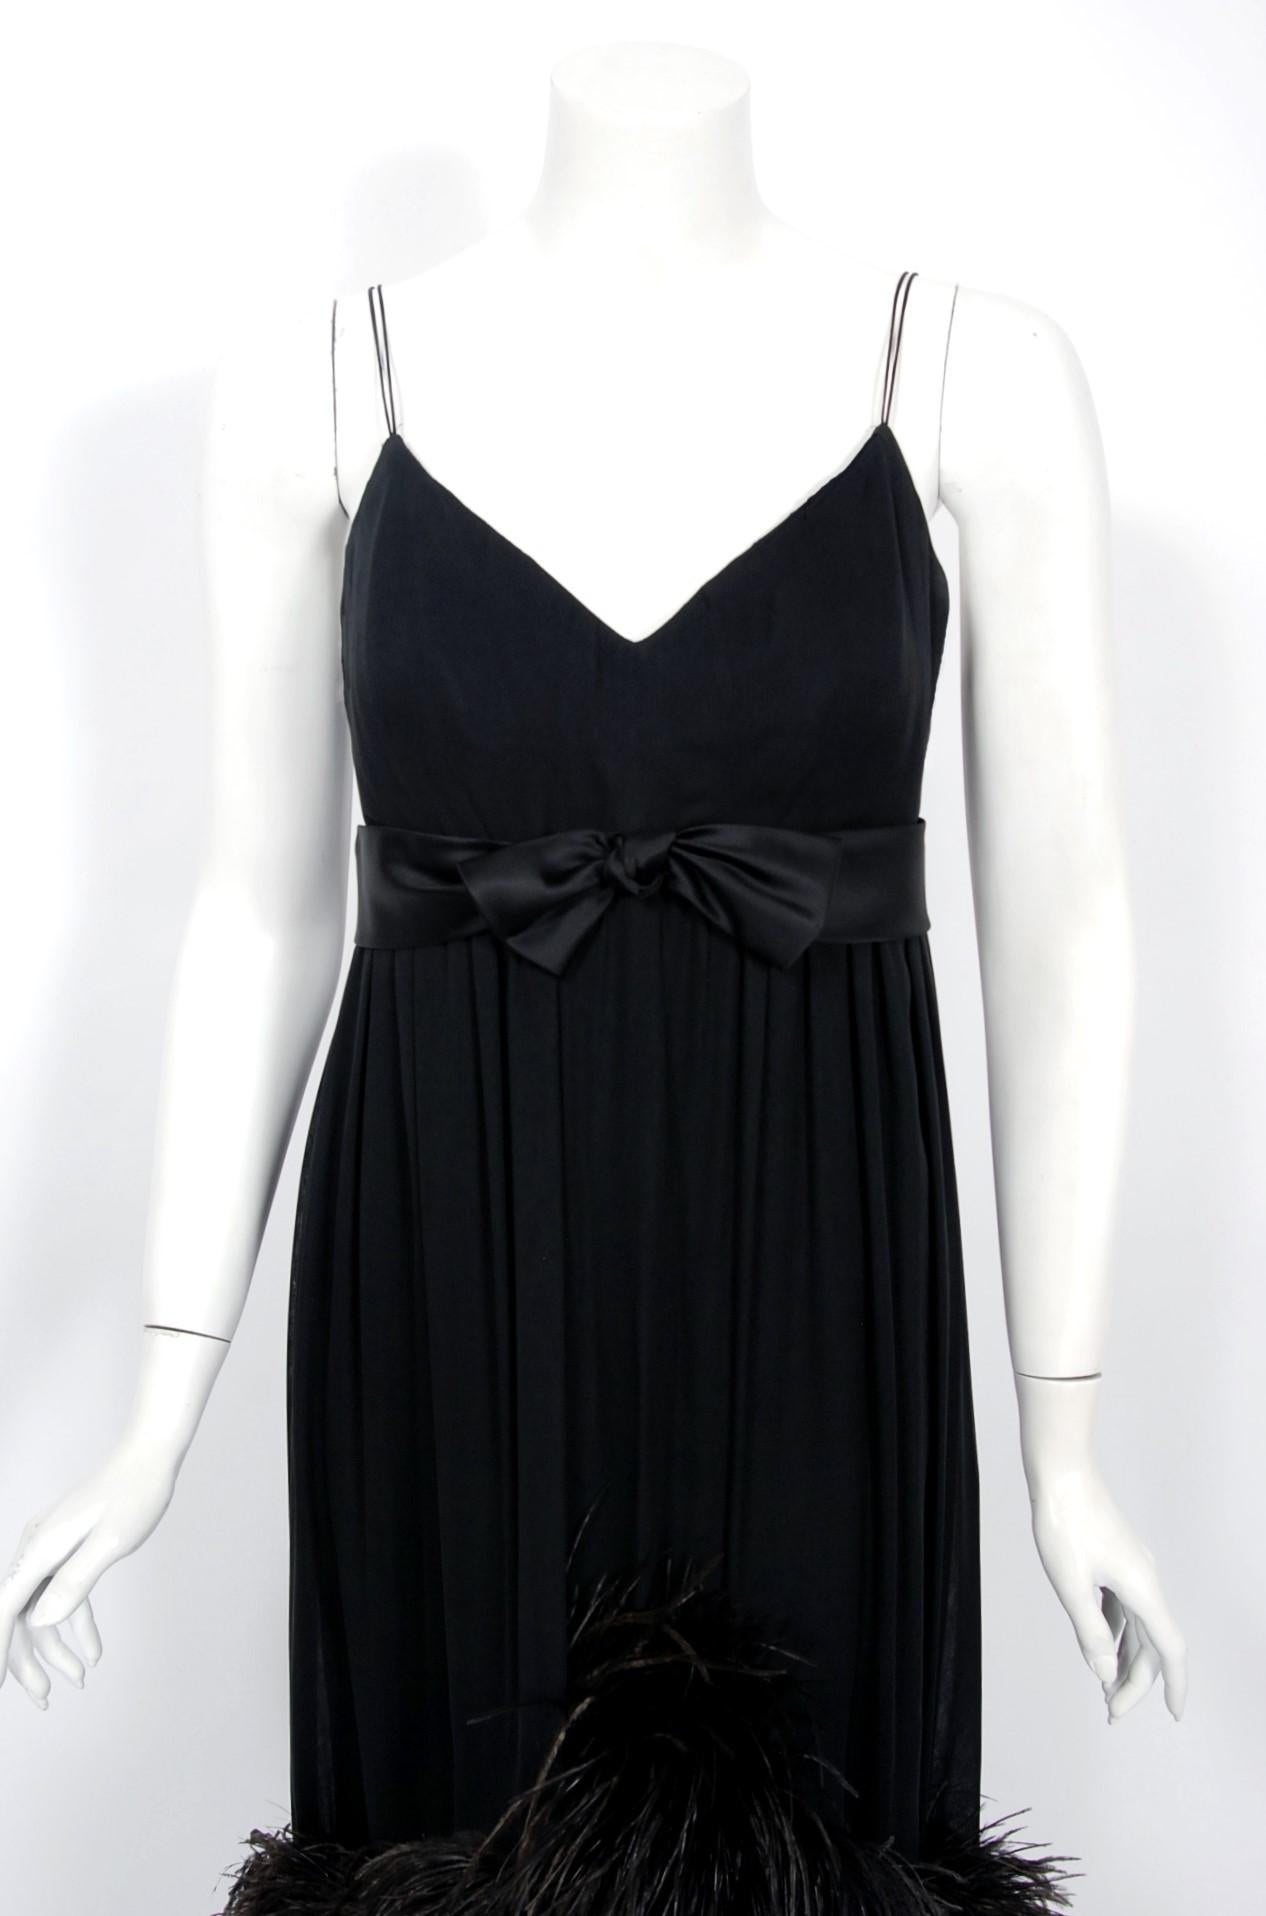 evening dress and stole of black feathers on black organza